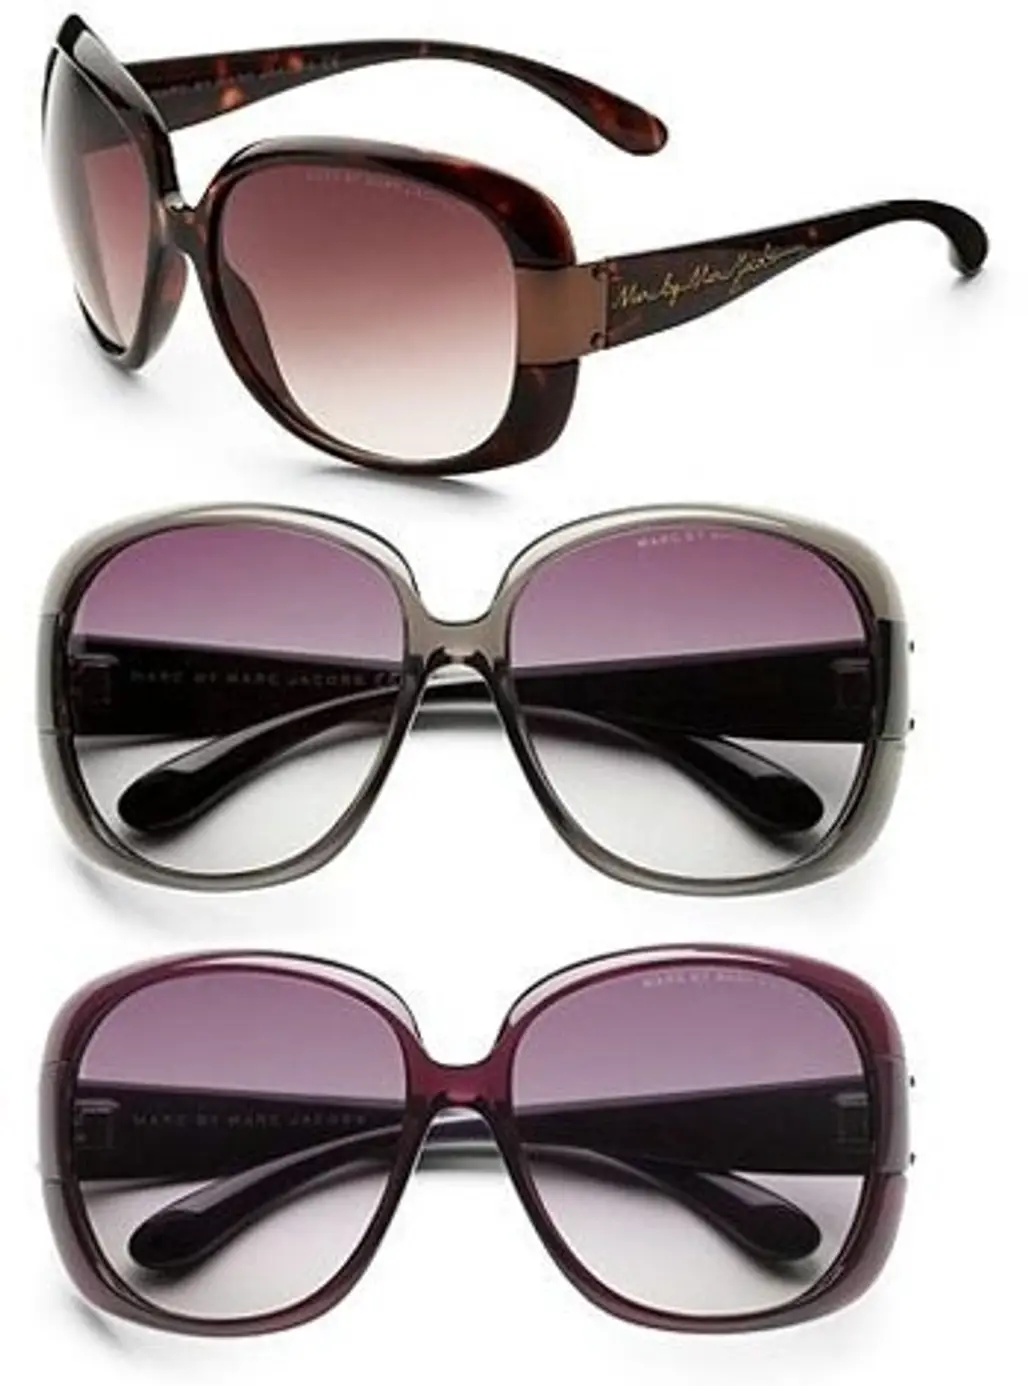 Marc by Marc Jacobs Medium Rounded Sunglasses